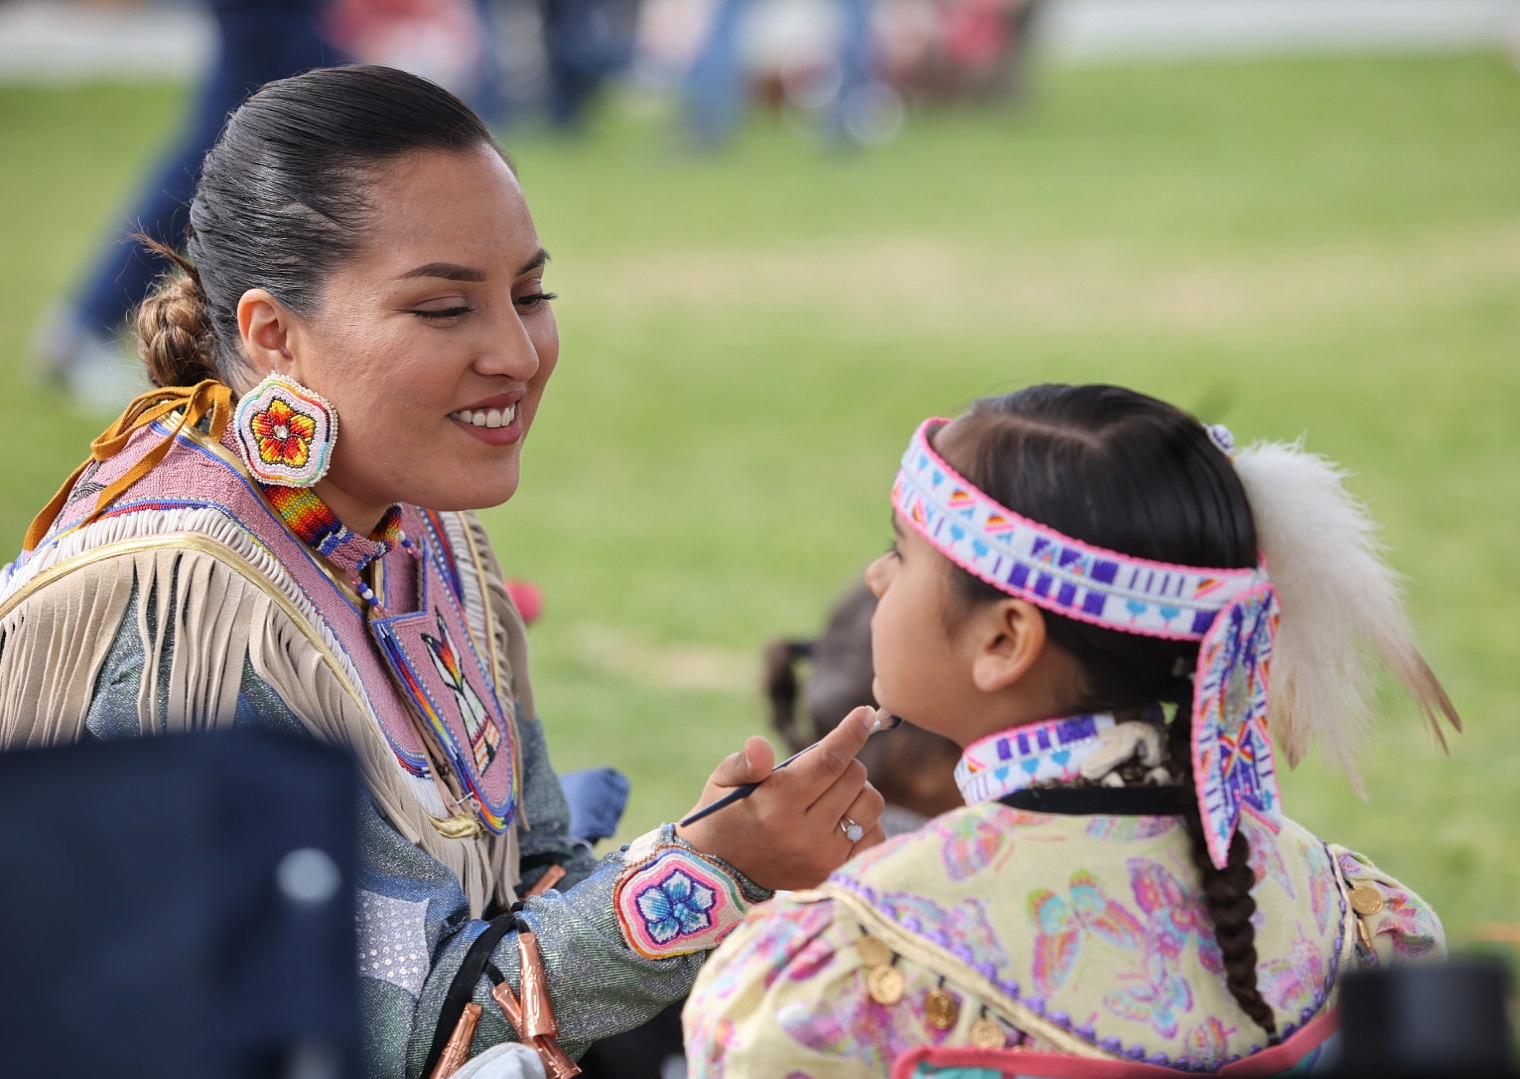 Dancers at the powwow